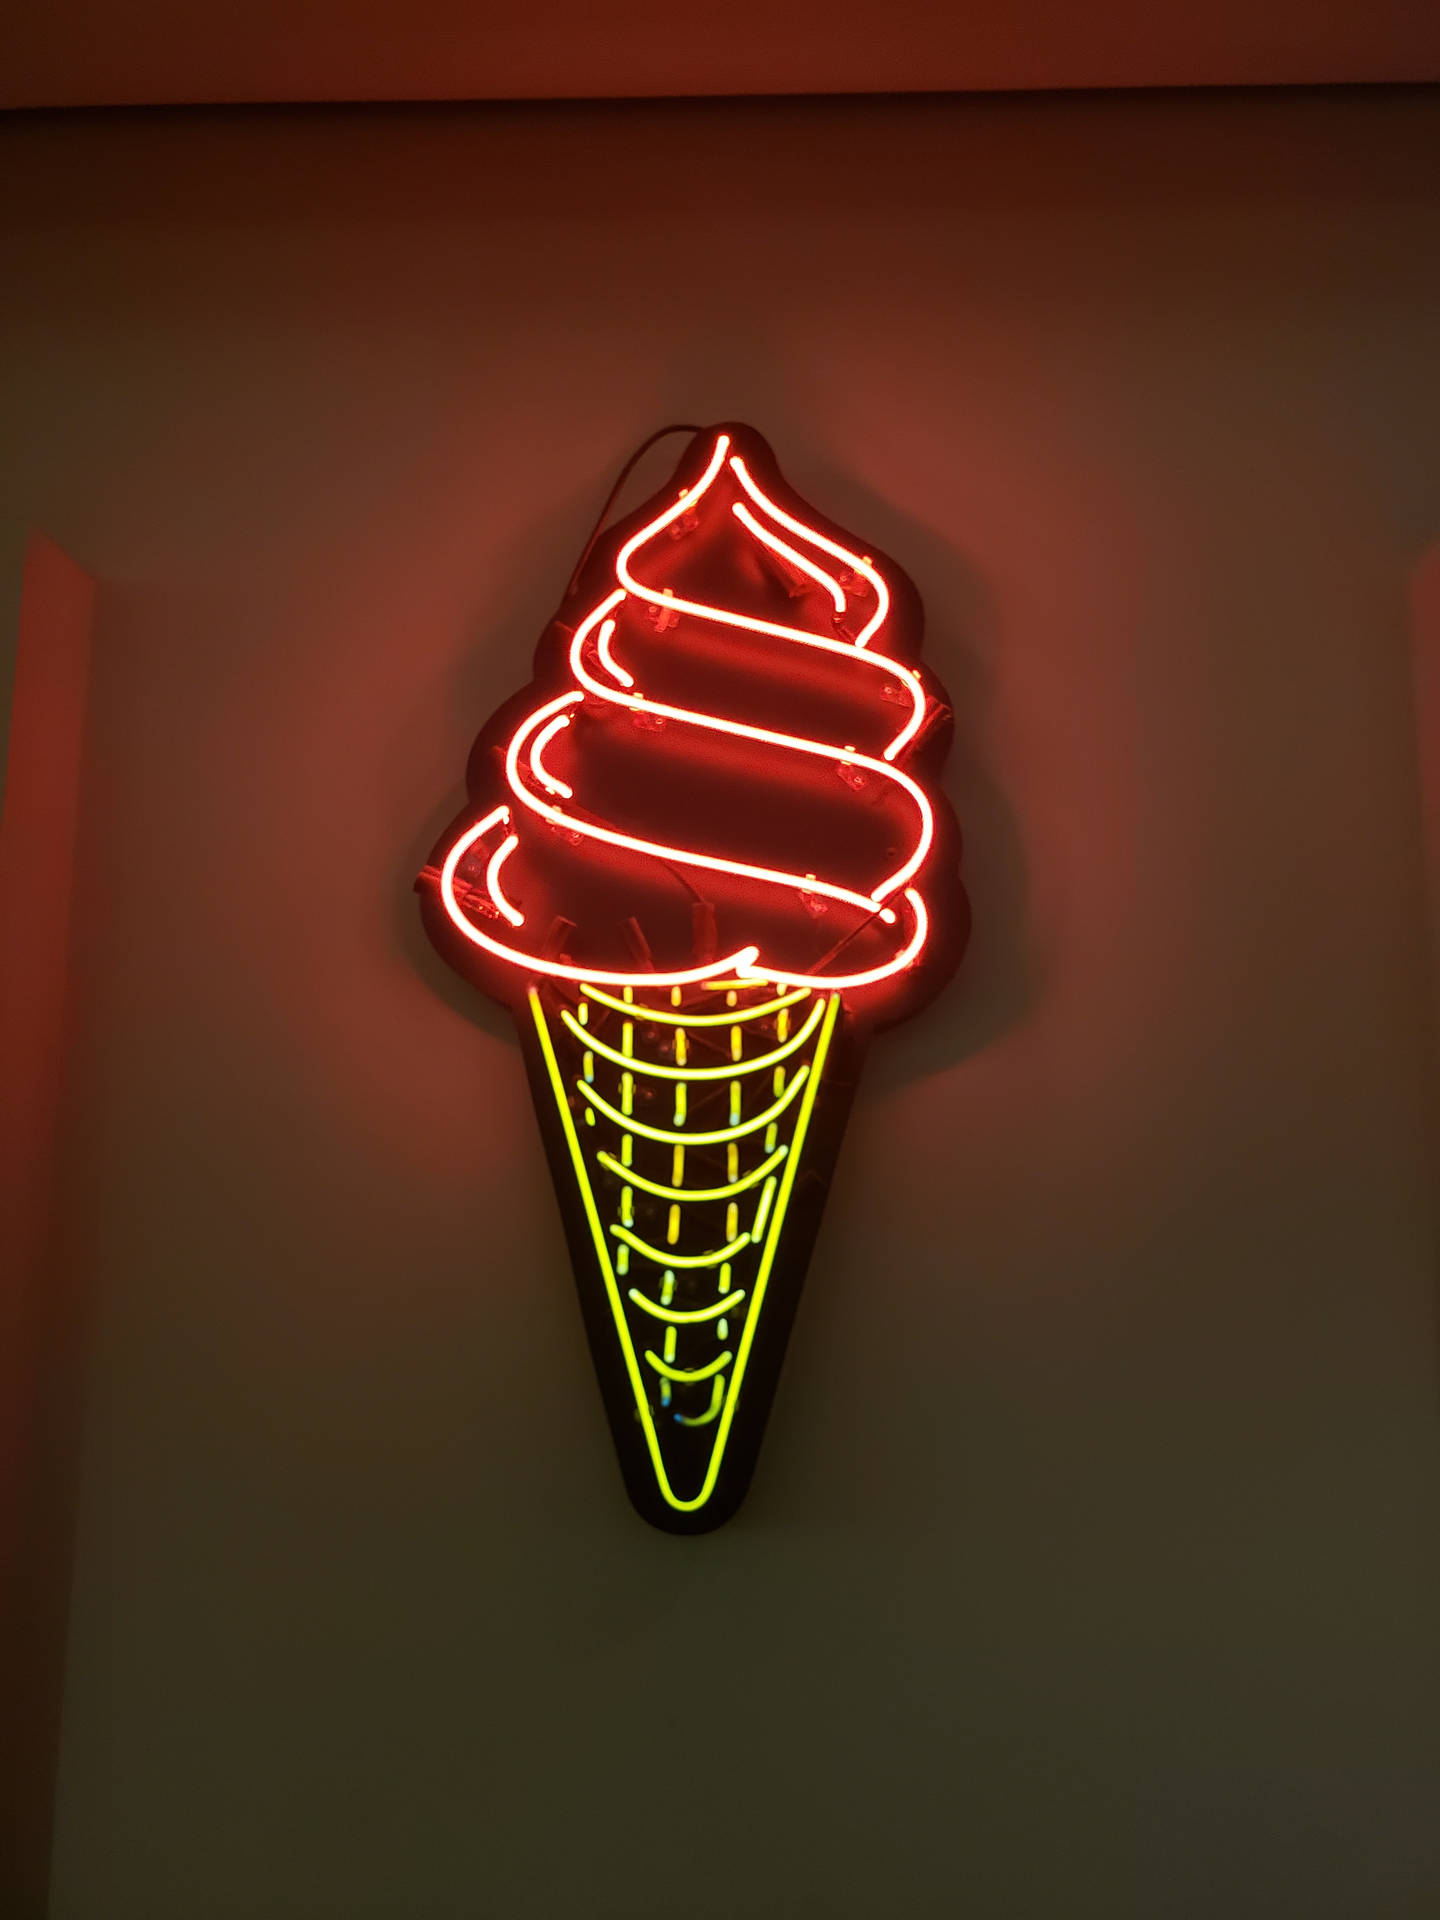 Ice Cream 3024X4032 Wallpaper and Background Image